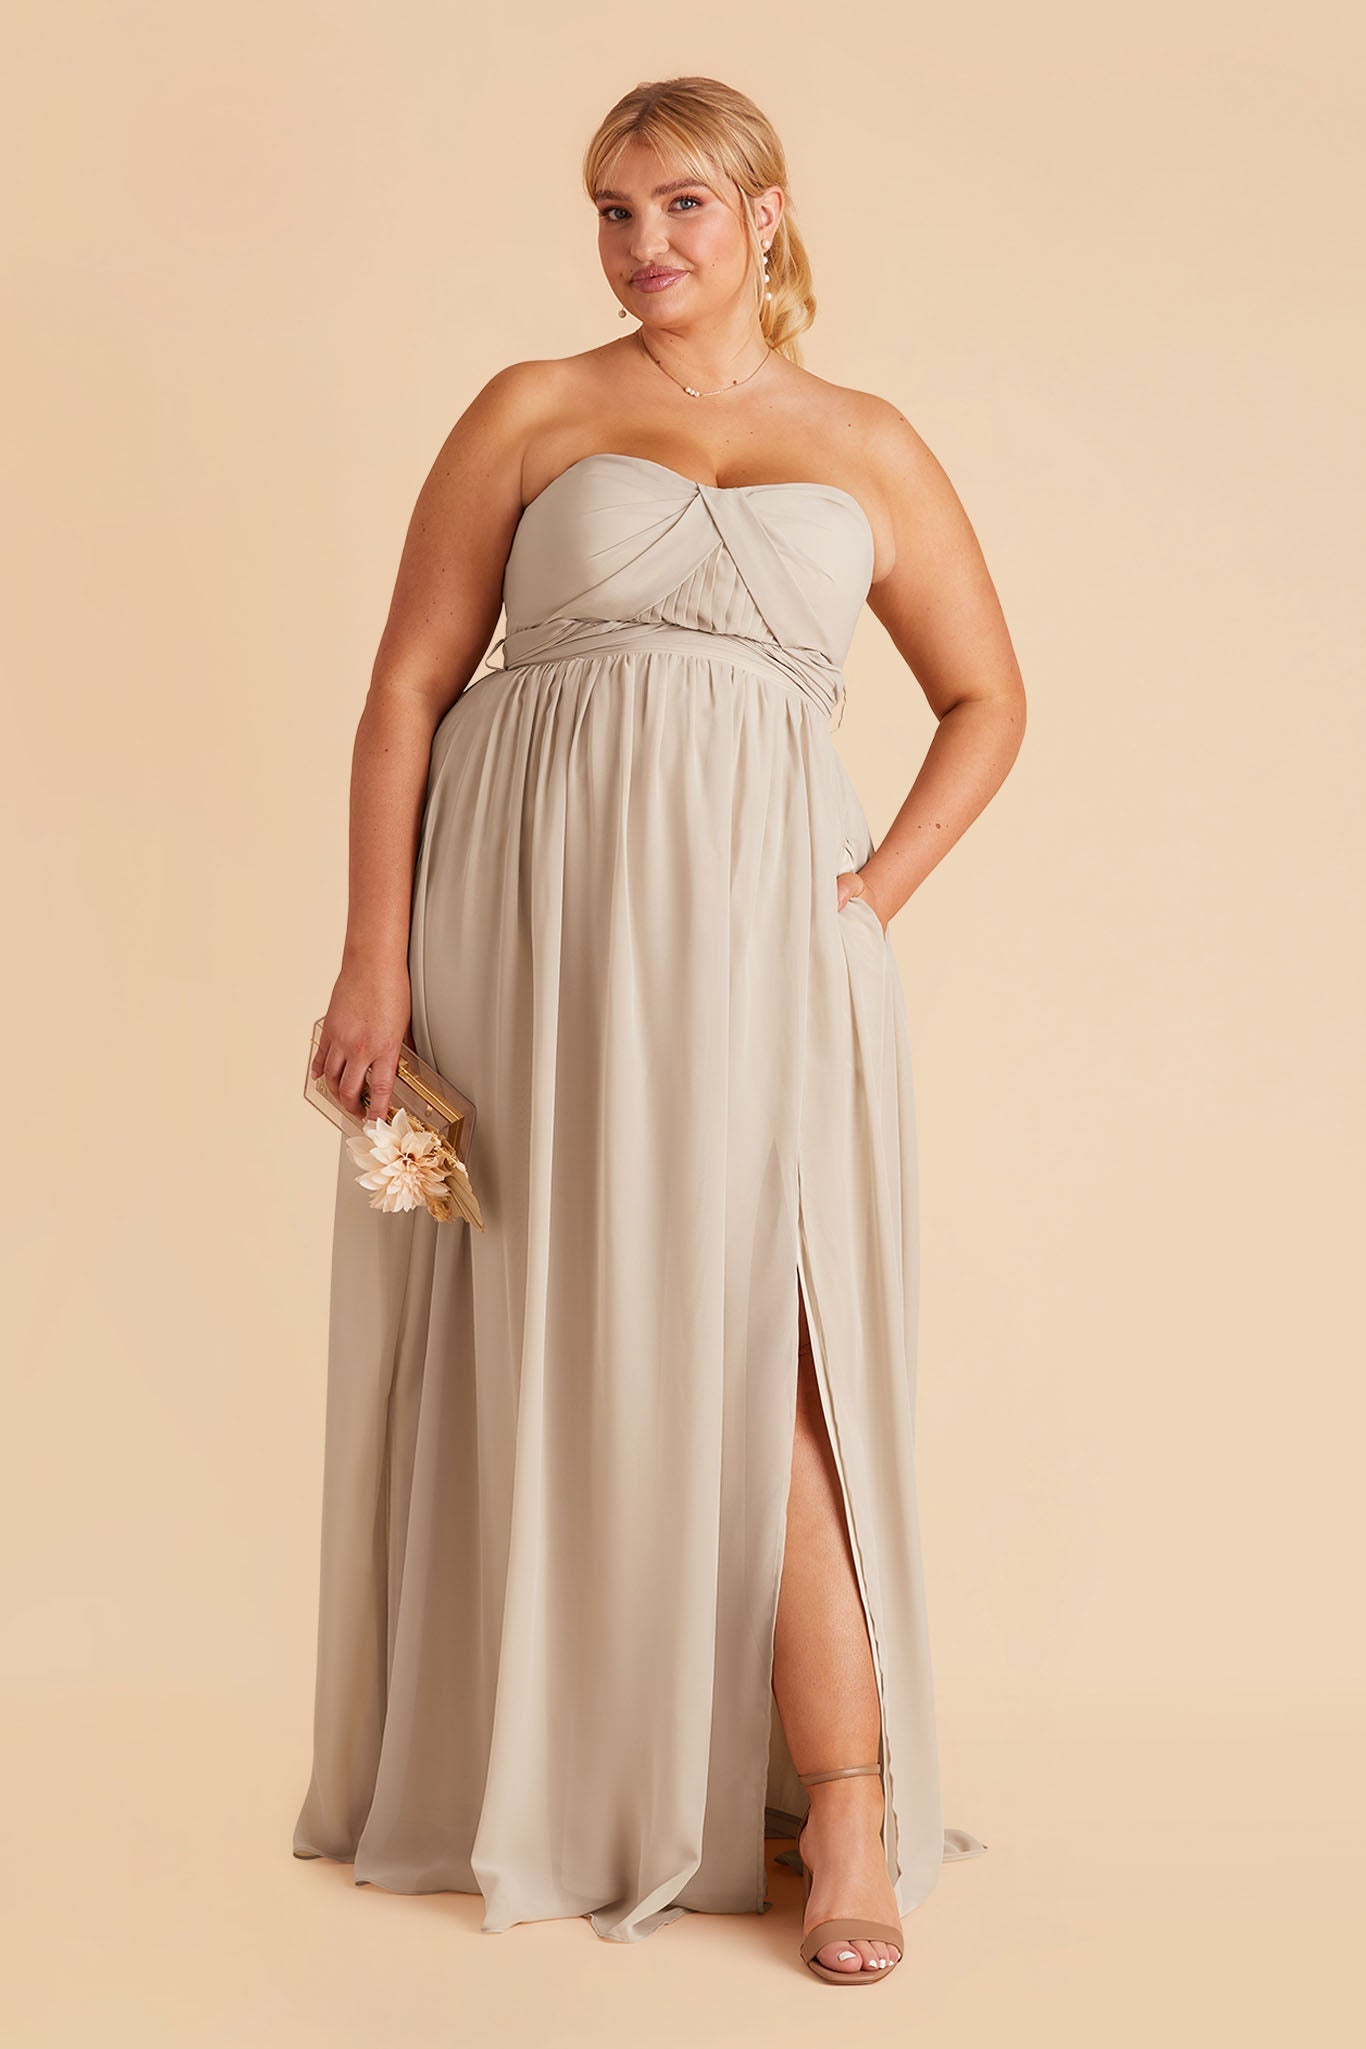 Grace plus size convertible bridesmaid dress in Neutral Champagne Chiffon by Birdy Grey, front view